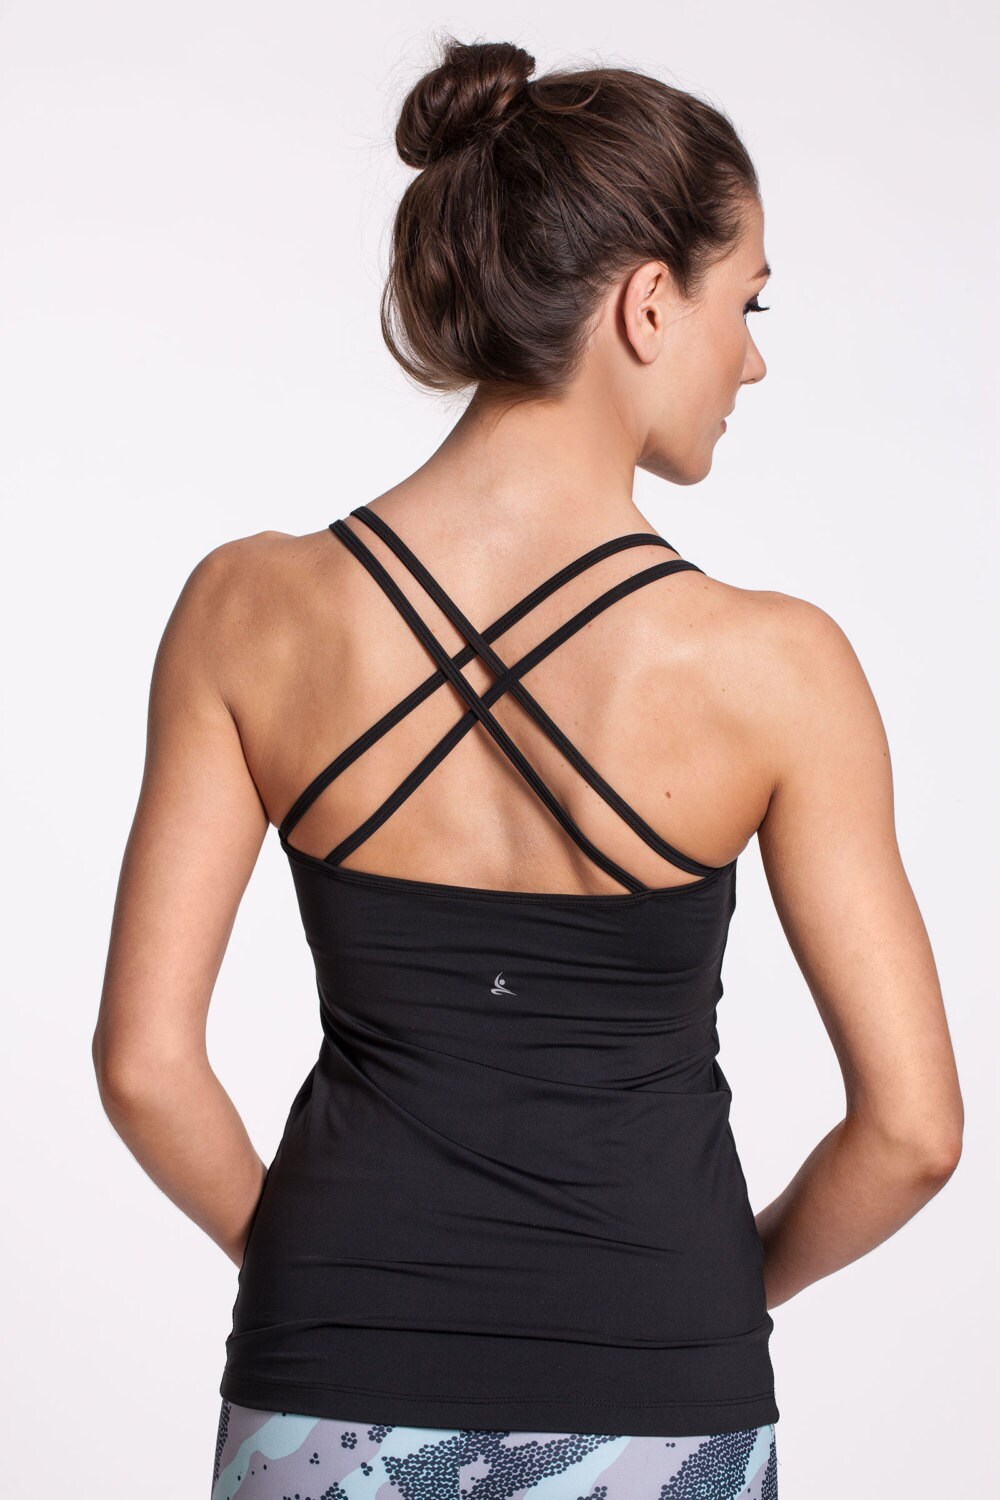 Yoga Top With Built in Bra, Strappy Yoga Tank Top, Barre Tank Top